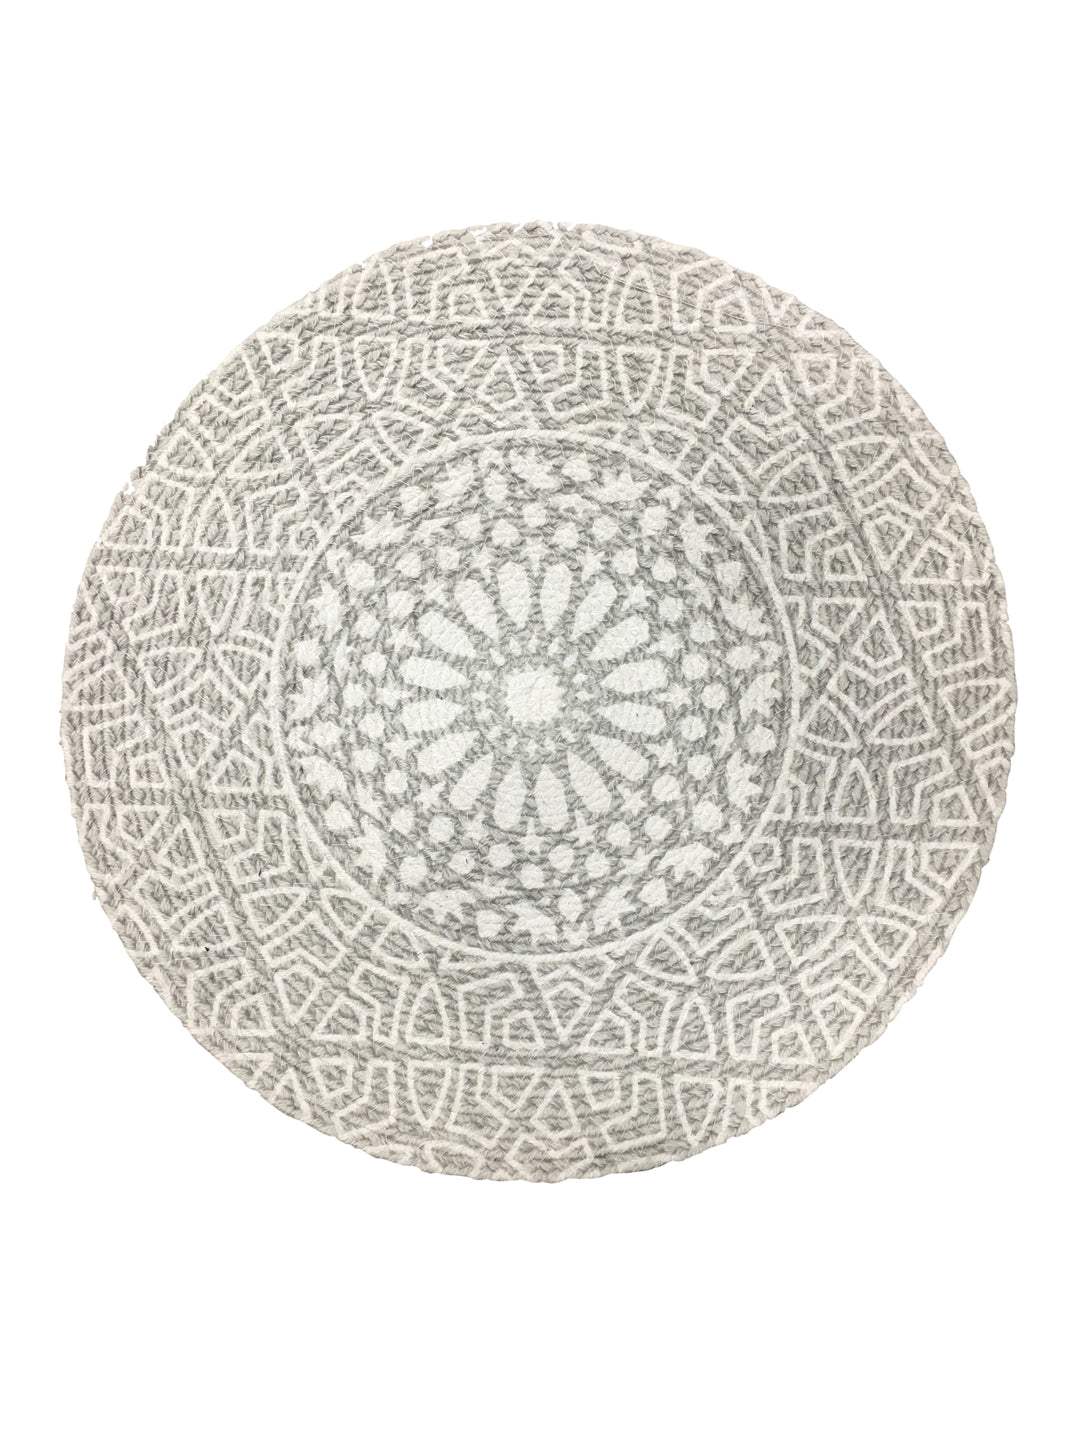 Jute Placemats, Chargers / Set of 2 / 15 in. Round/ Grey with White